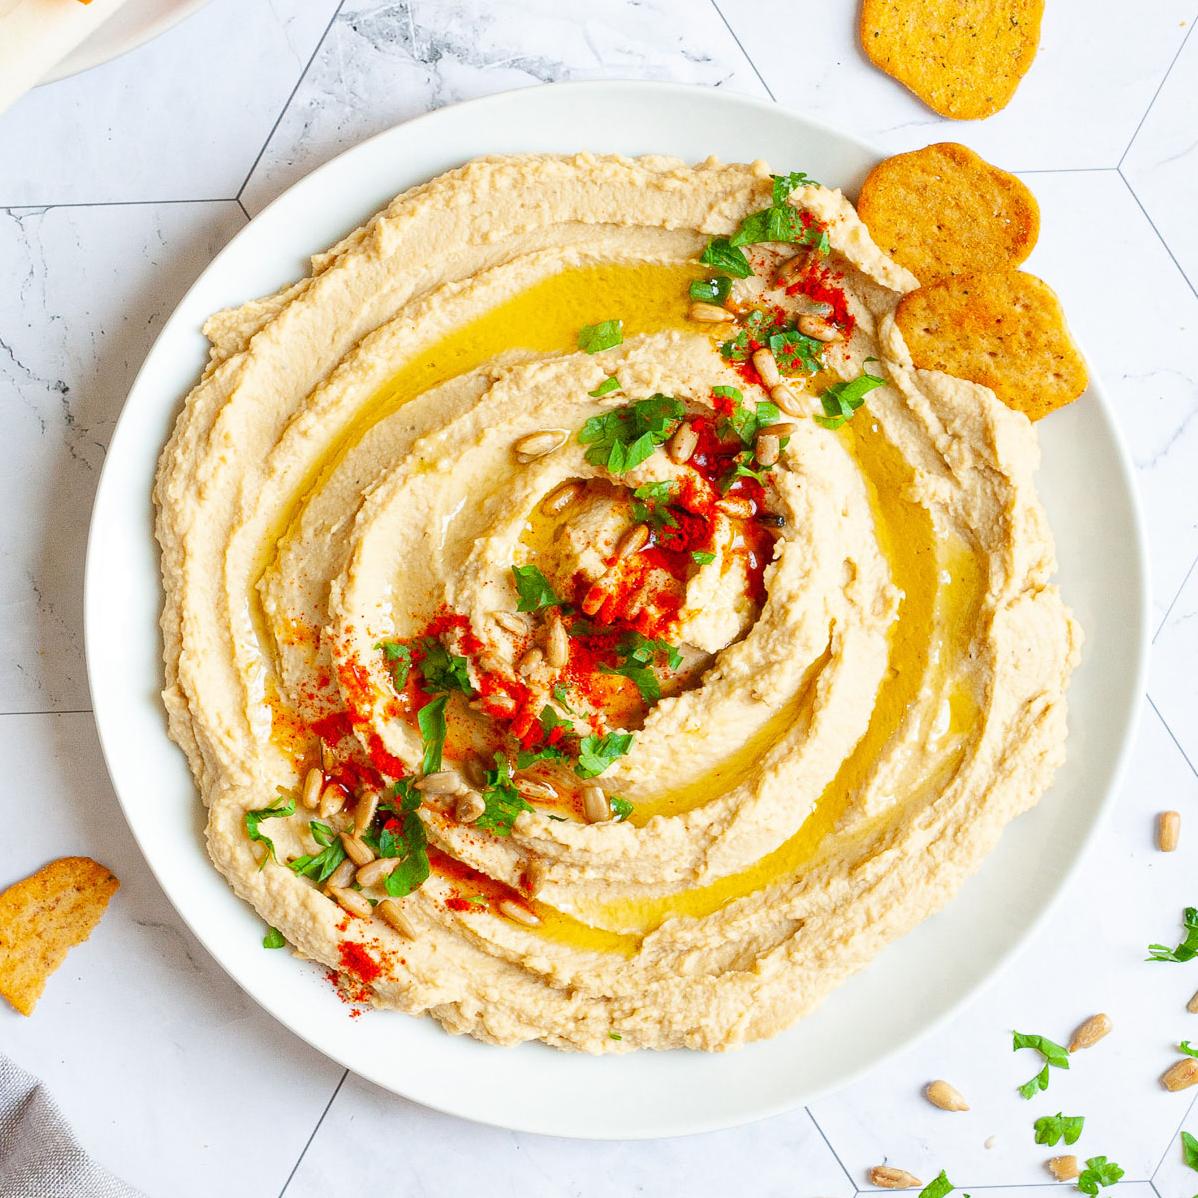  The perfect balance of tangy and nutty flavors make this Sprouted Sunflower Seed Hummus so addictive.